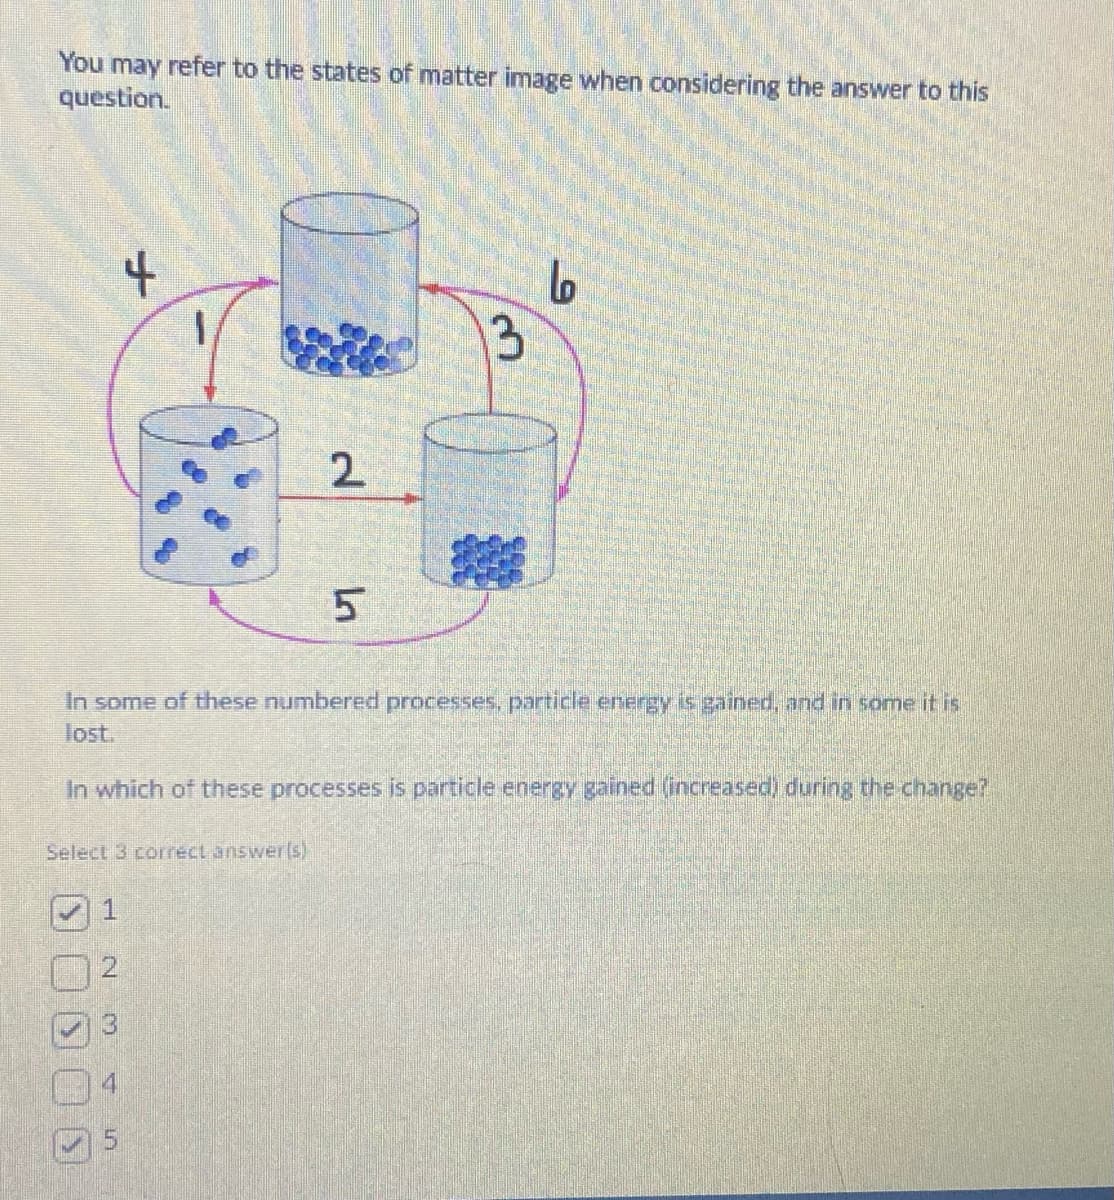 You may refer to the states of matter image when considering the answer to this
question.
Select 3 correct answer(s)
1
IN
m
+
In some of these numbered processes, particle energy is gained, and in some it is
lost.
In which of these processes is particle energy gained (increased) during the change?
5
5
2
5
13
Lo